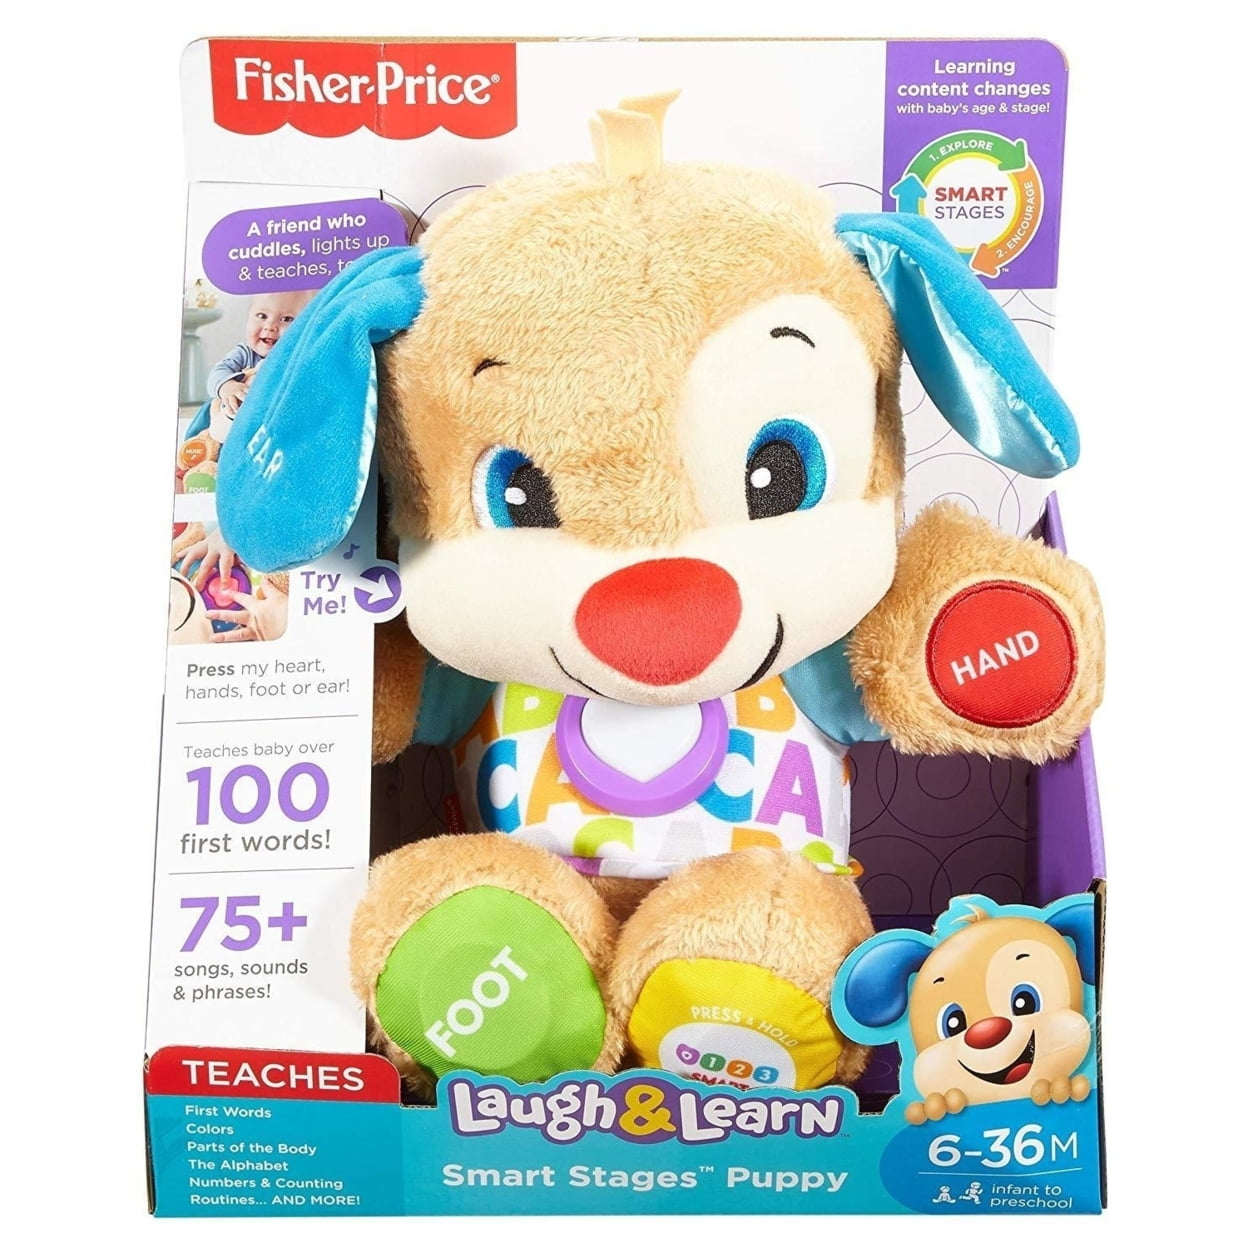 Fisher-Price Laugh and Learn Smart Stages Puppy Baby Doll Songs Lights Talks FDF21